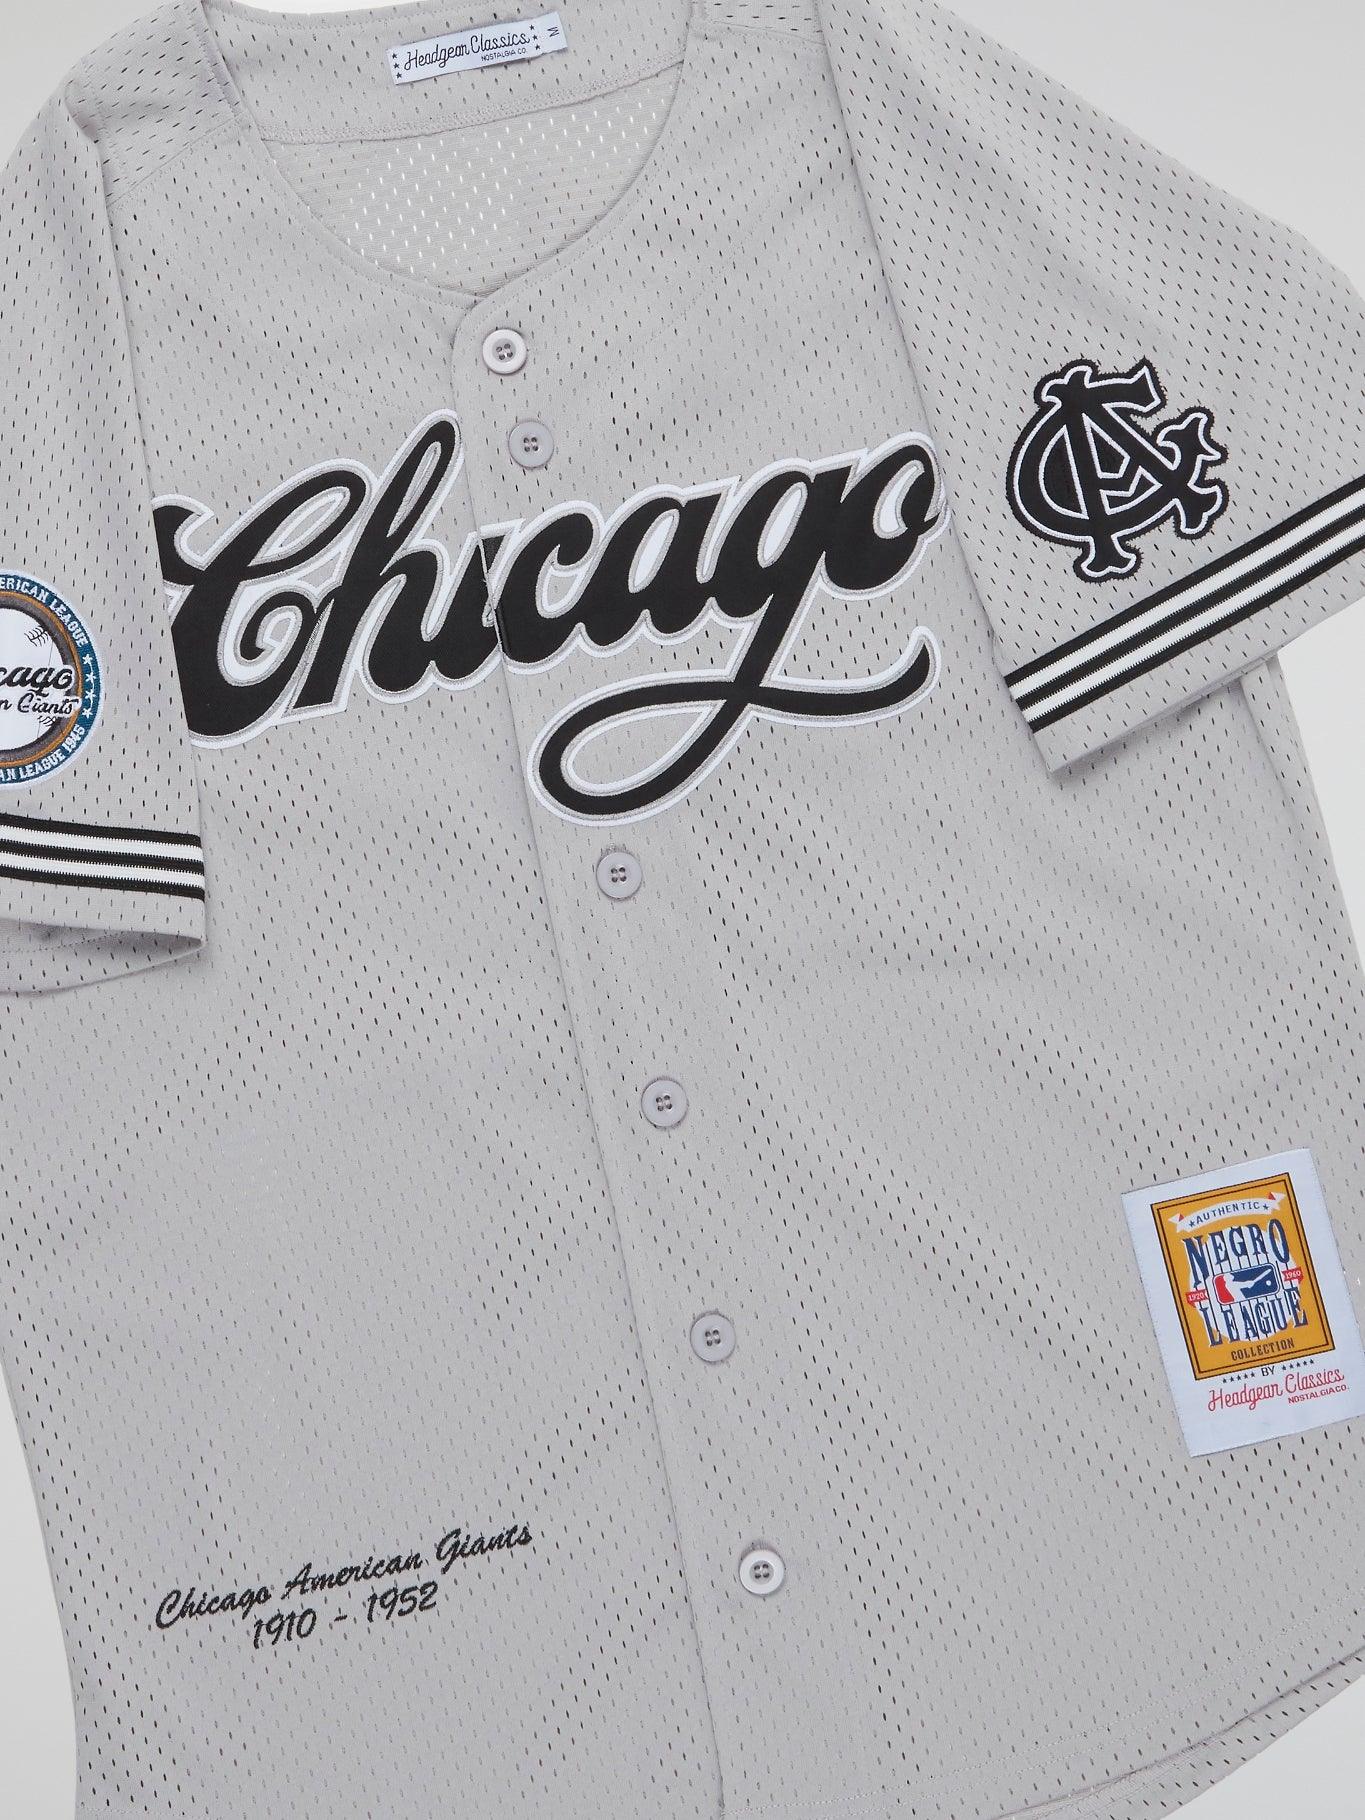 Chicago American Giants Button Down Jersey - B-Hype Society